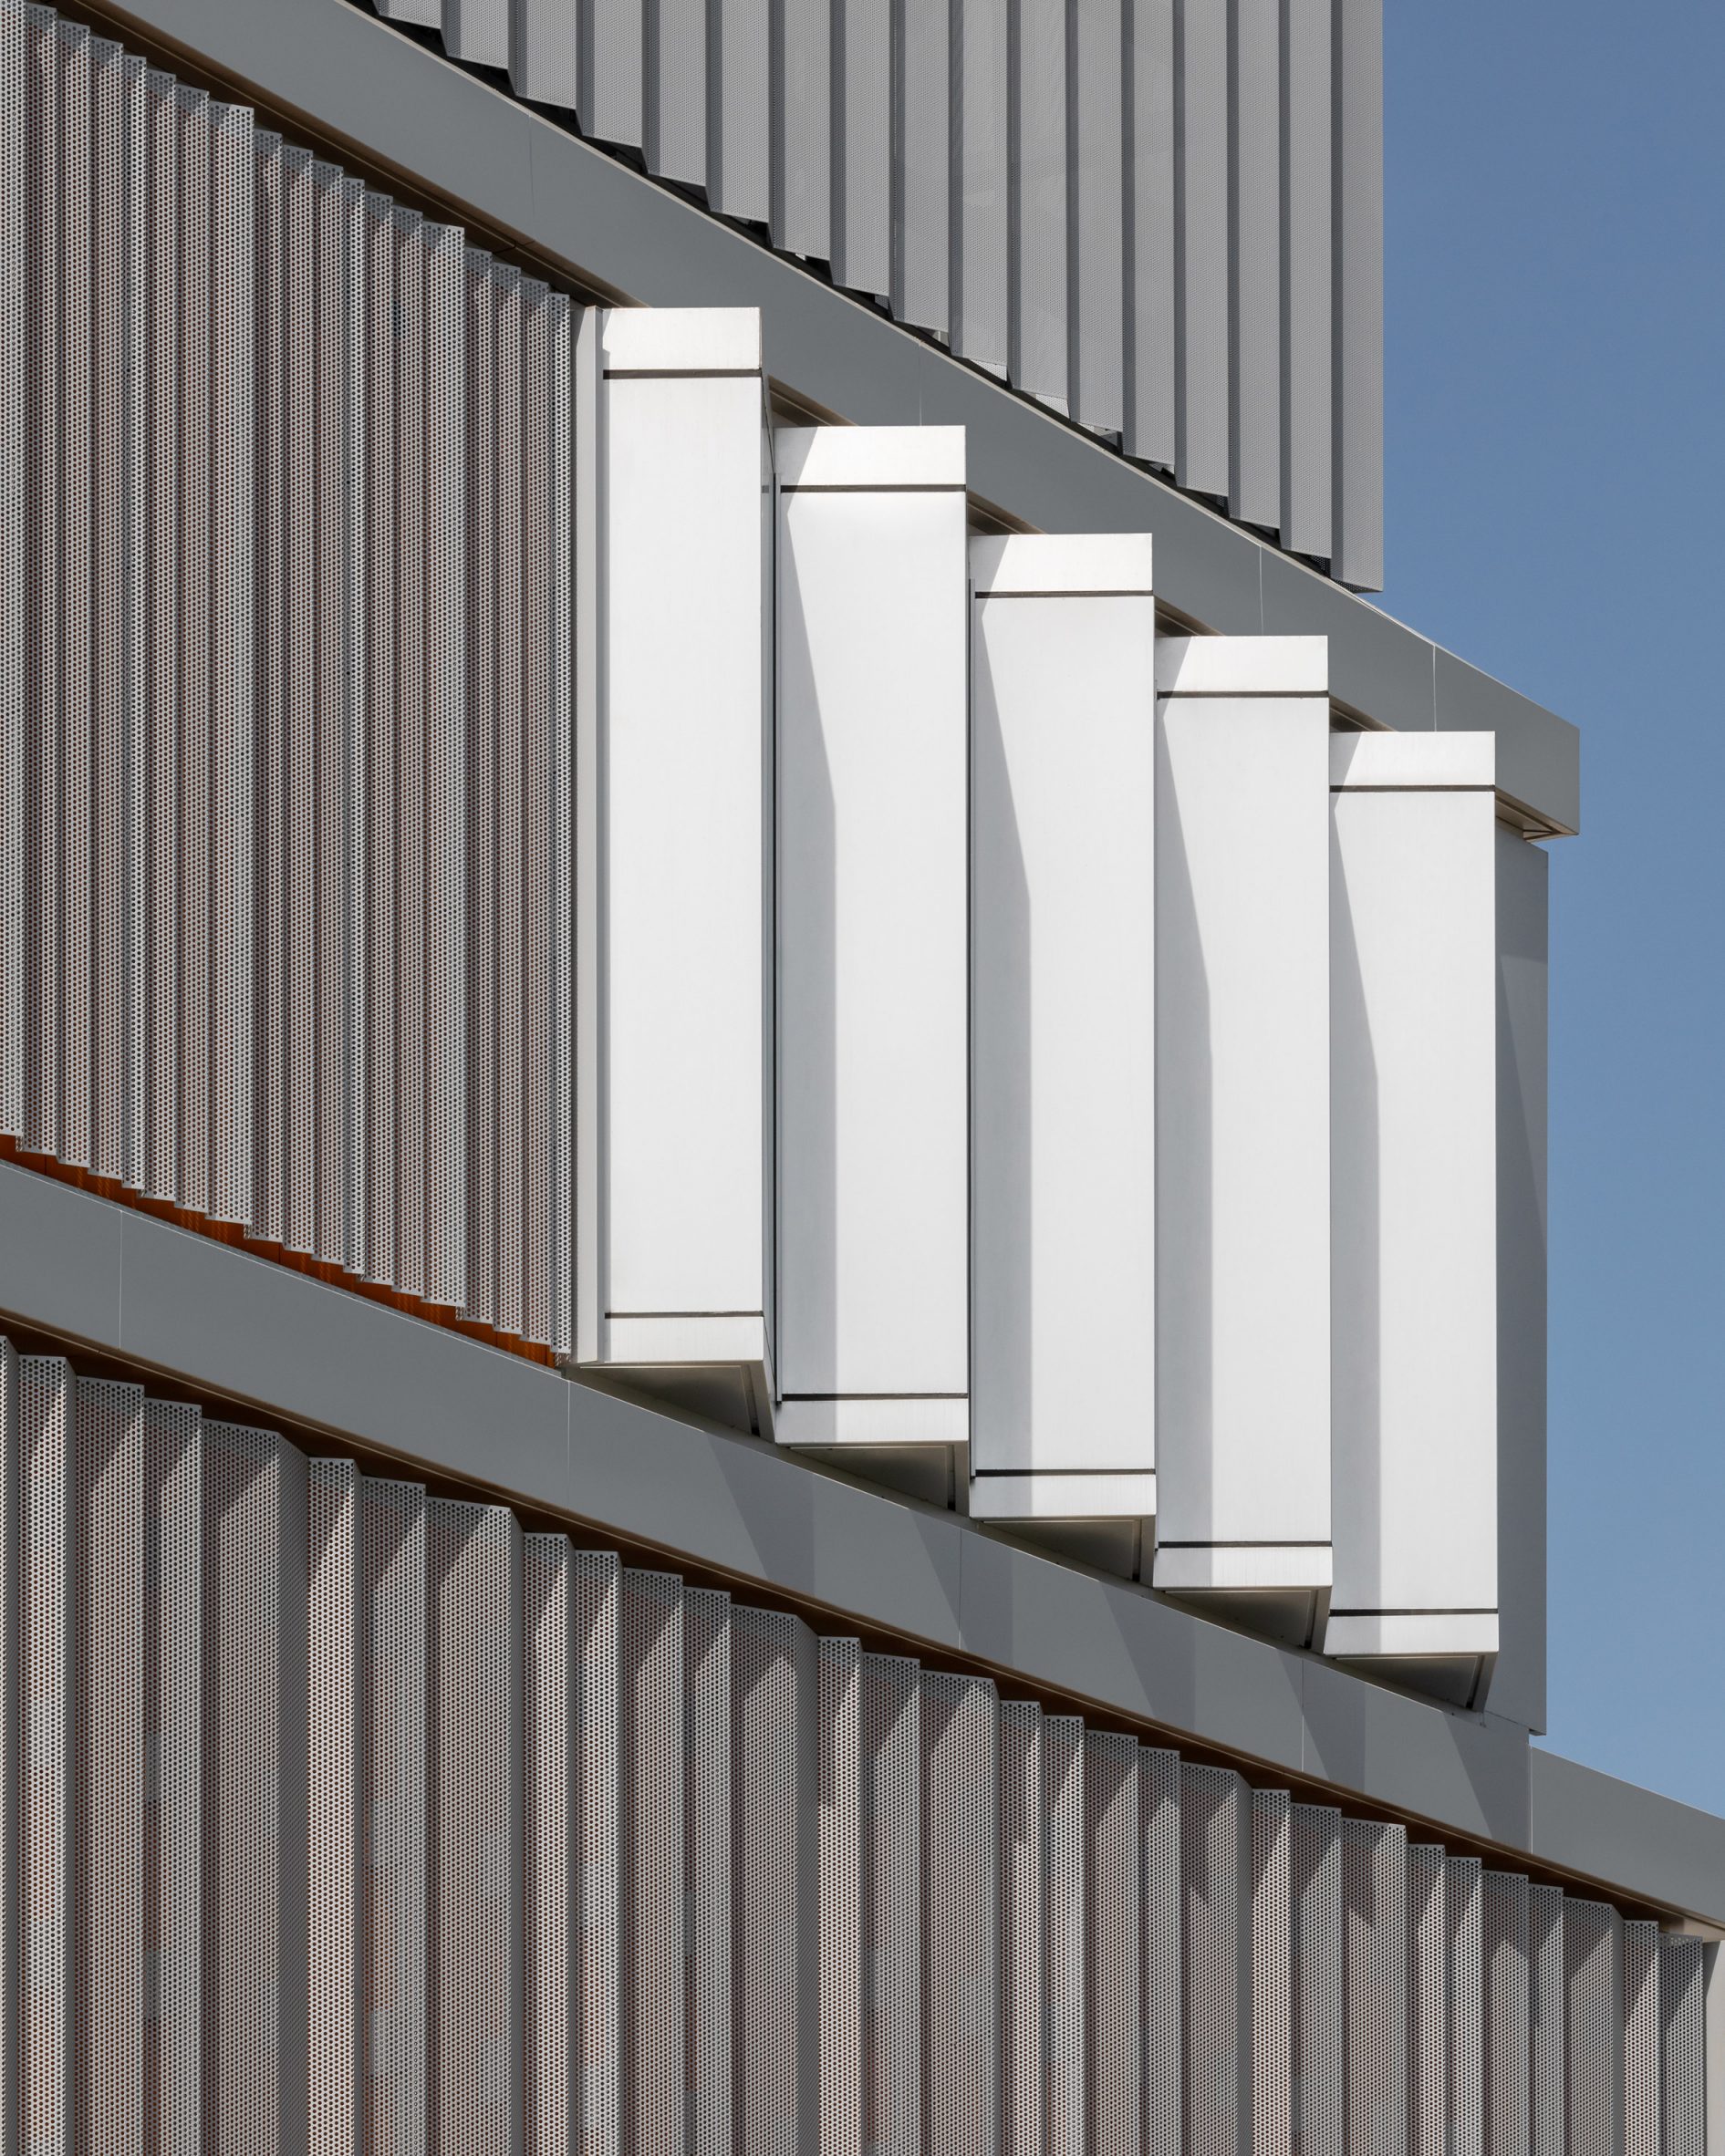 Detail image of the zig zagging facade panels at West Hub